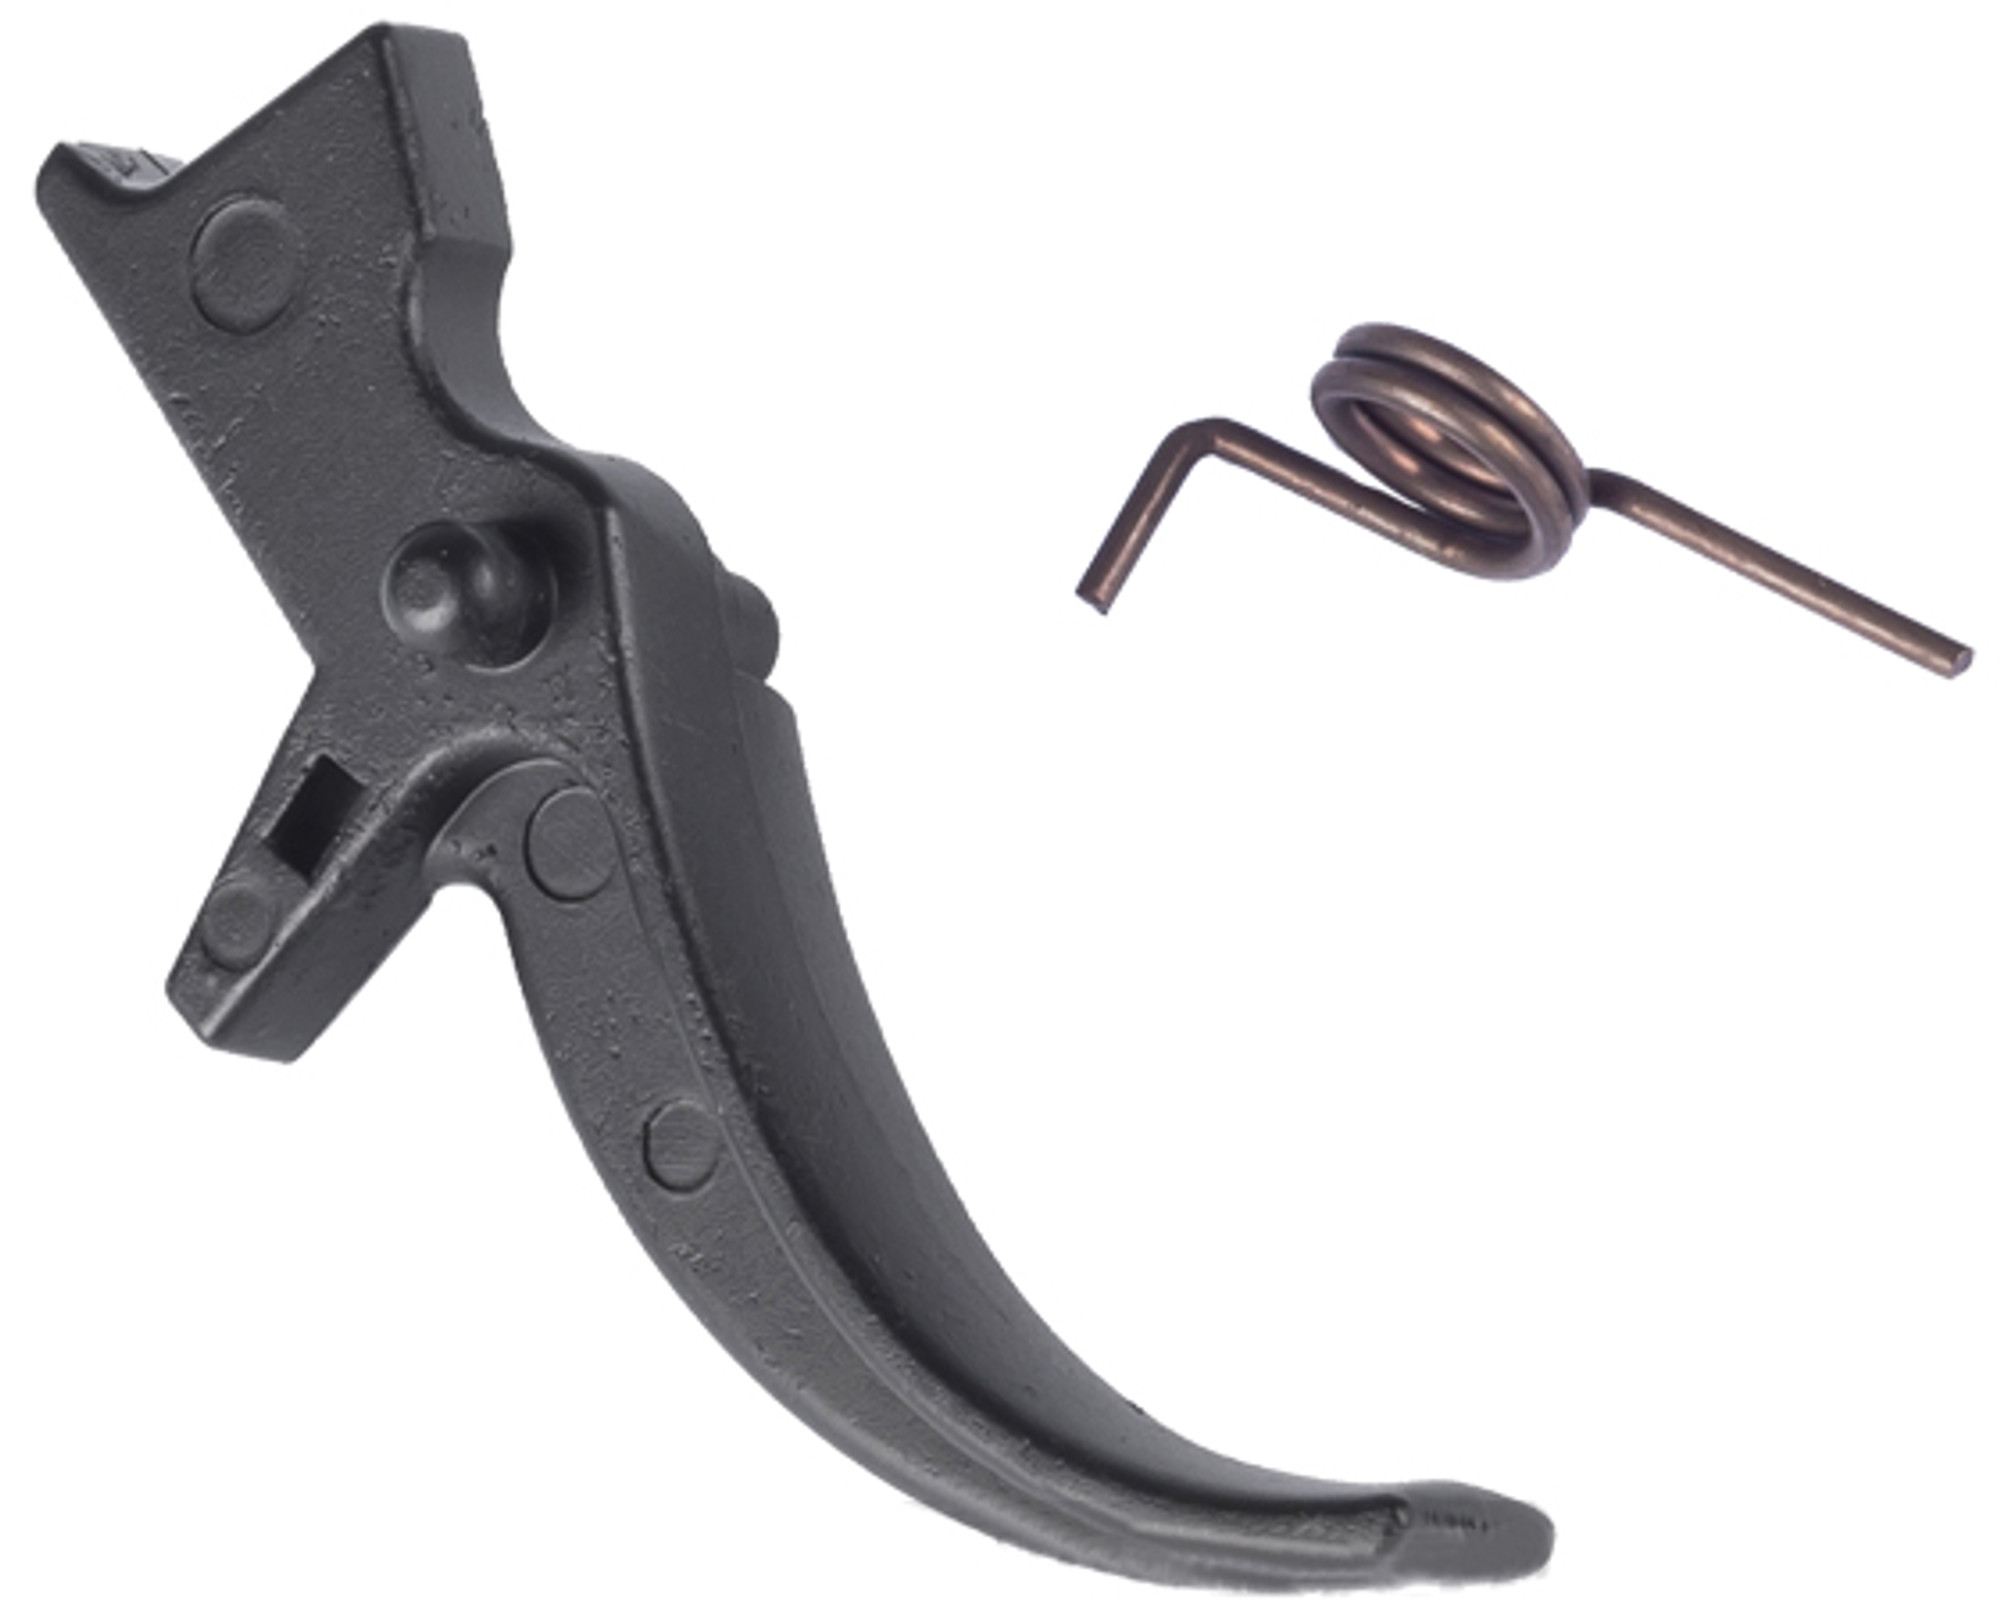 ASG Ultimate Upgrade Steel Trigger for M4 / M16 Series Airsoft AEG